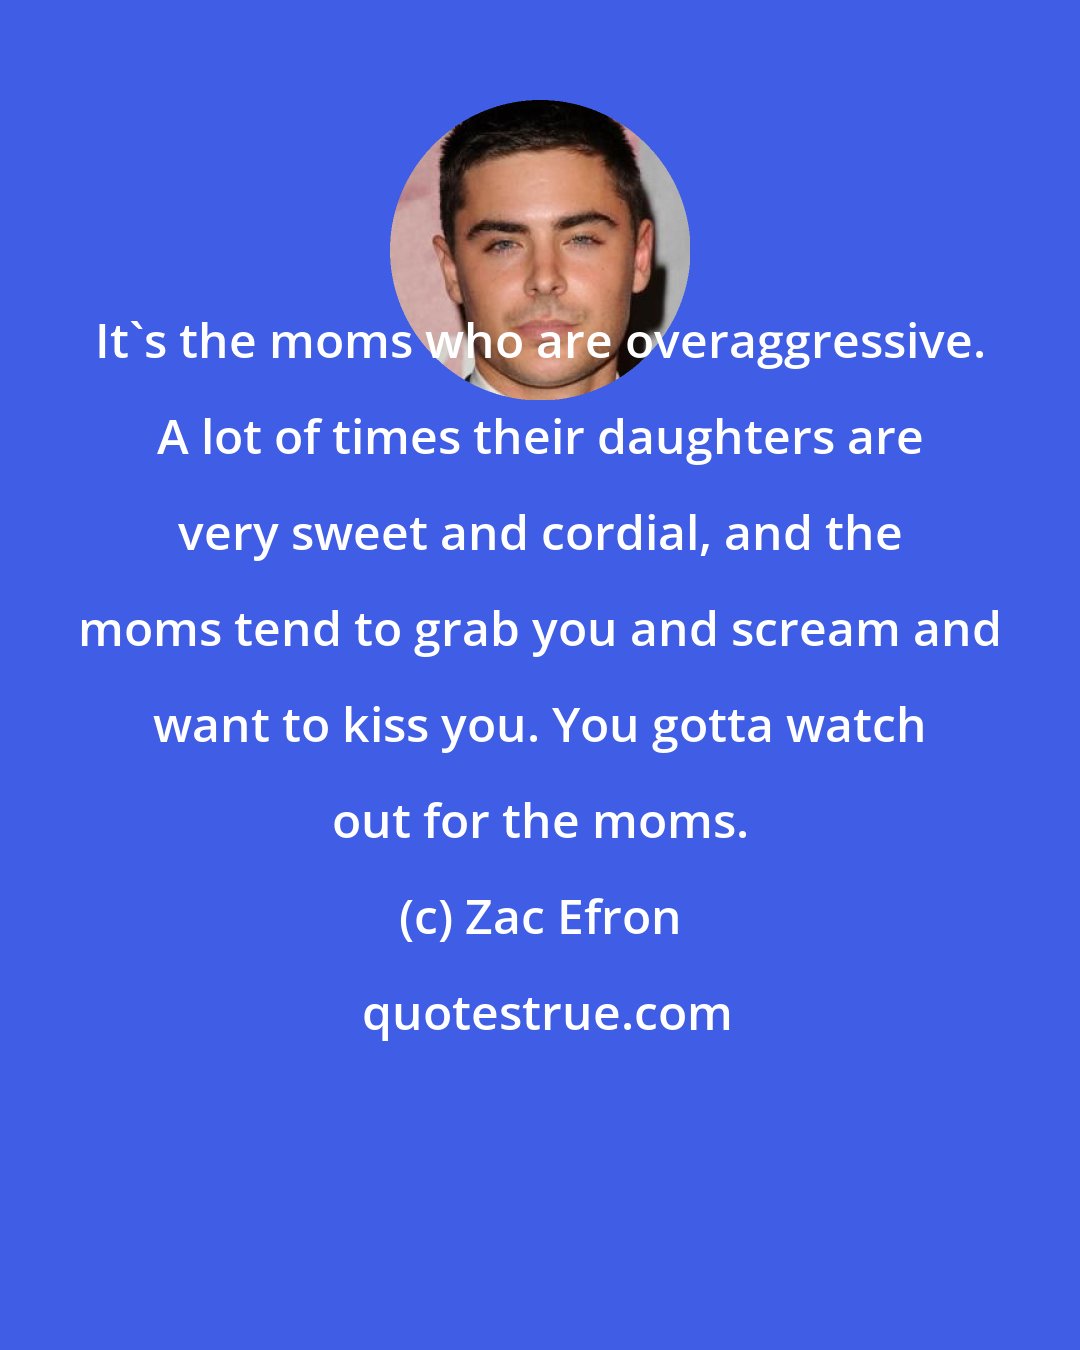 Zac Efron: It's the moms who are overaggressive. A lot of times their daughters are very sweet and cordial, and the moms tend to grab you and scream and want to kiss you. You gotta watch out for the moms.